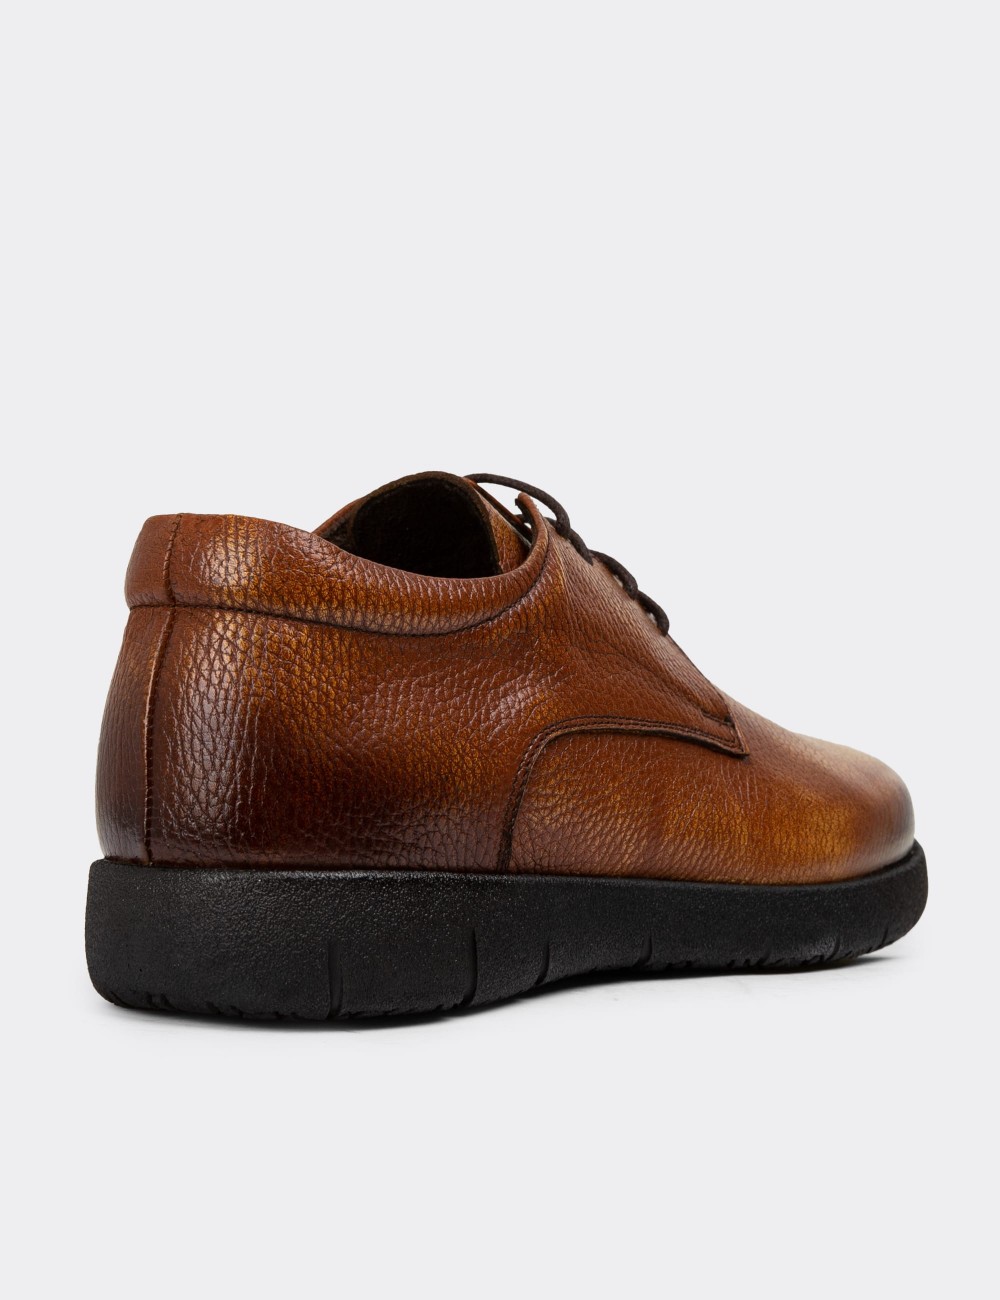 Tan Leather Lace-up Shoes - 01934MTBAC02